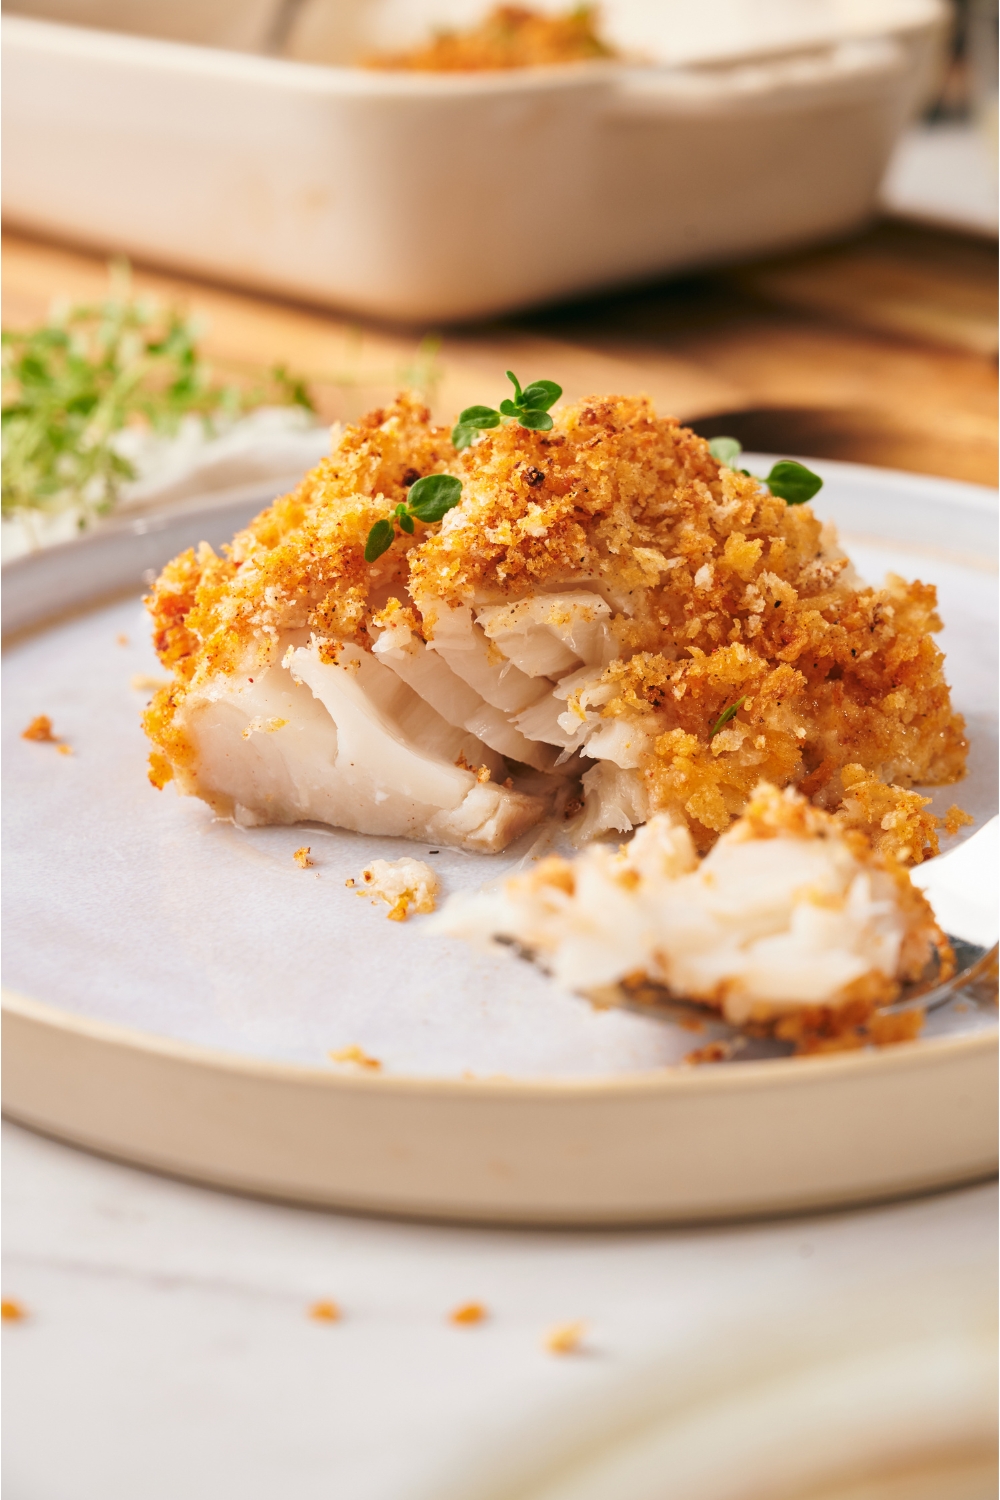 A baked cod fillet topped with golden brown bread crumbs and garnished with fresh herbs. A bite has been taken out and is on a fork on the plate.